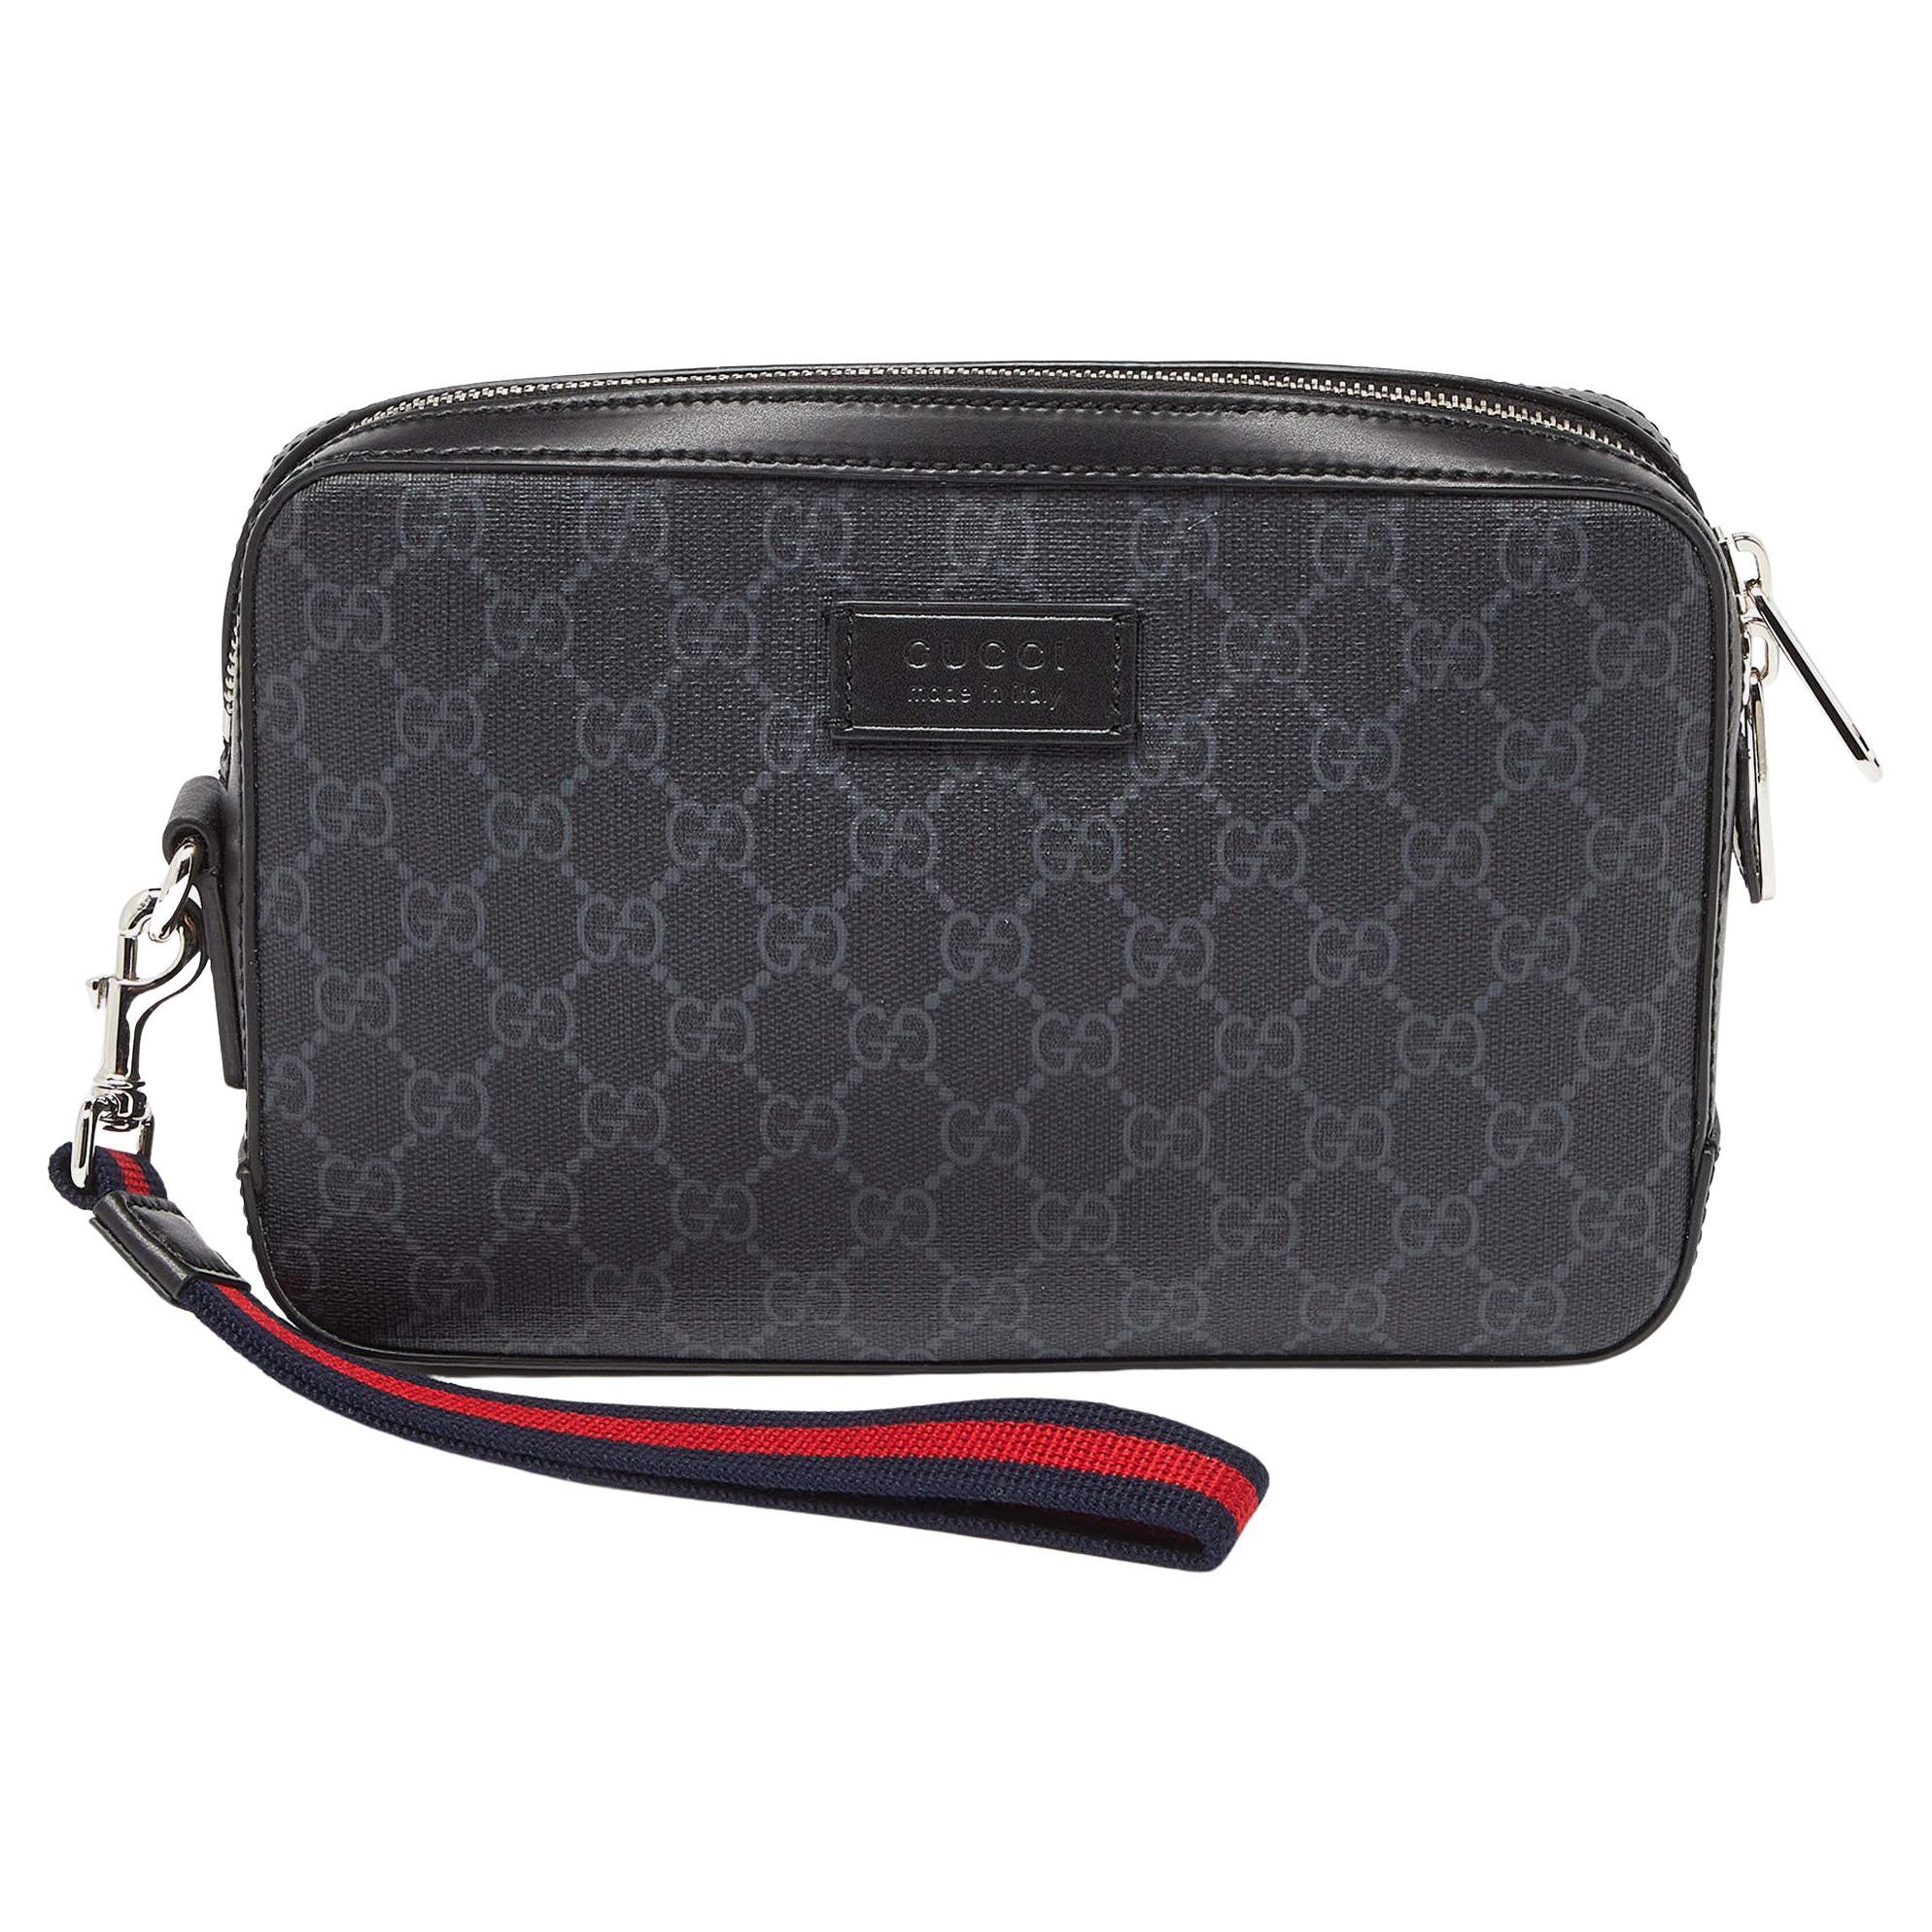 Gucci Black/Grey GG Supreme Canvas and Leather Wristlet Pouch